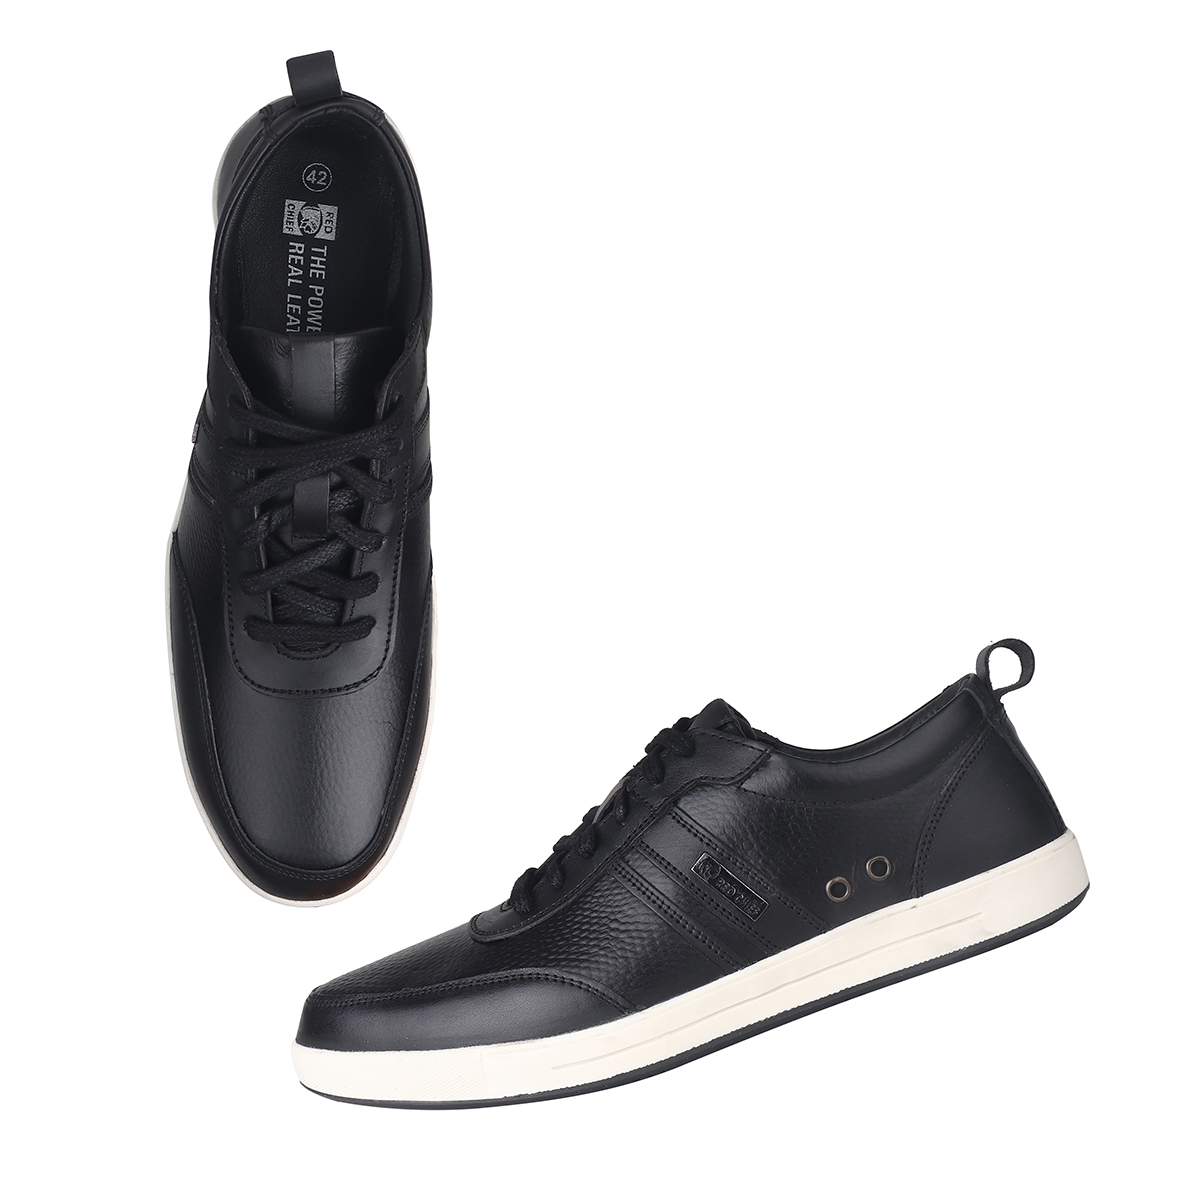 Redchief Black Top Lace-Up Casual Shoes For Men